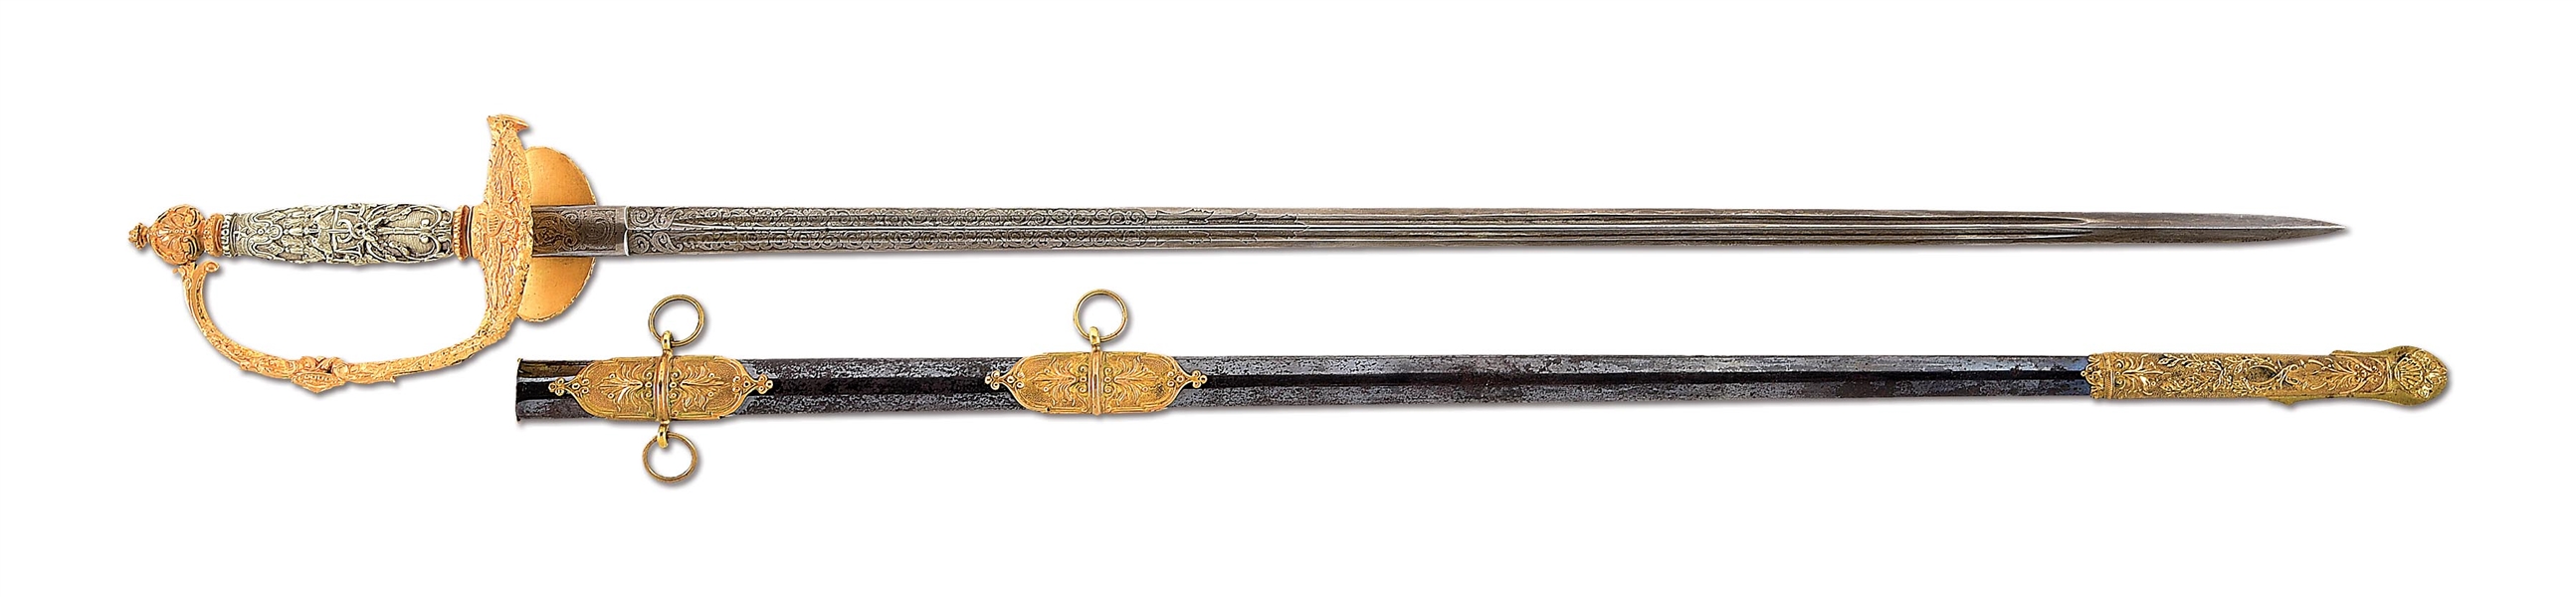 ORNATE M1860 STAFF AND FIELD OFFICER SWORD WITH DAMASCUS BLADE.